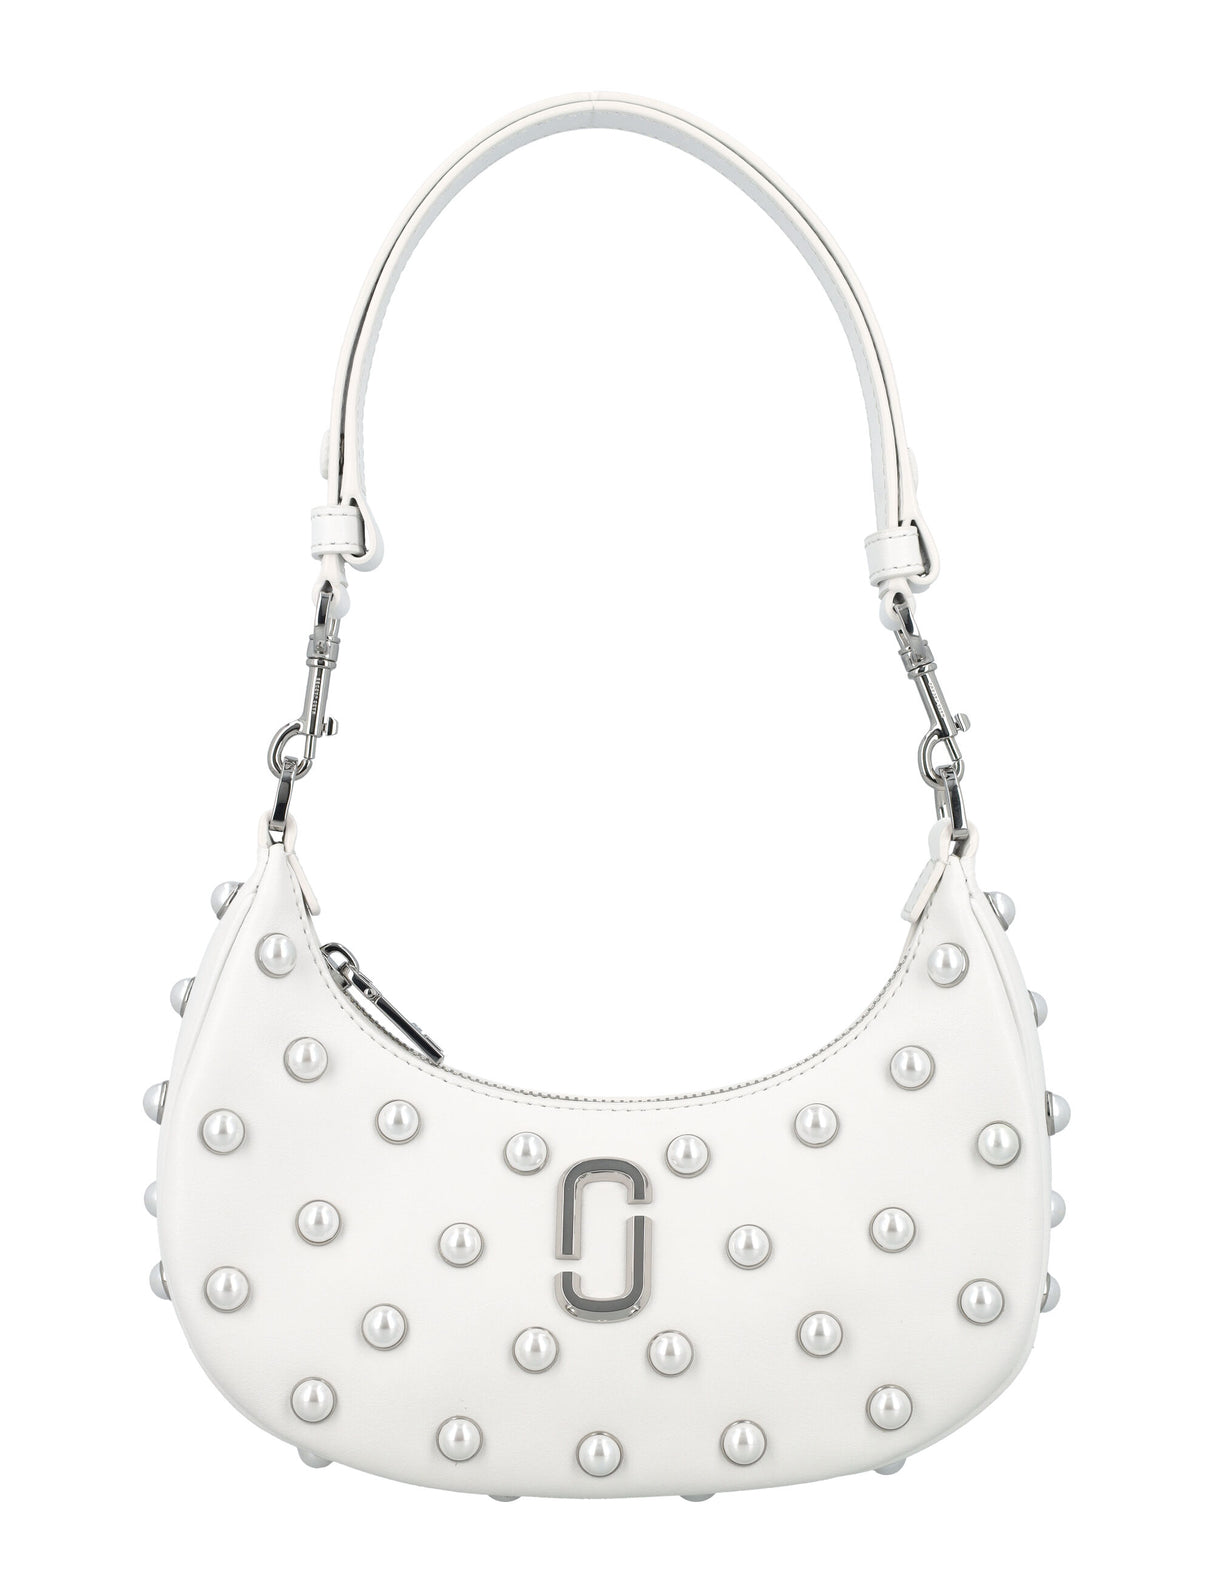 MARC JACOBS Mini Curve Pearl White Leather Crossbody Bag with Faux Pearl Accents